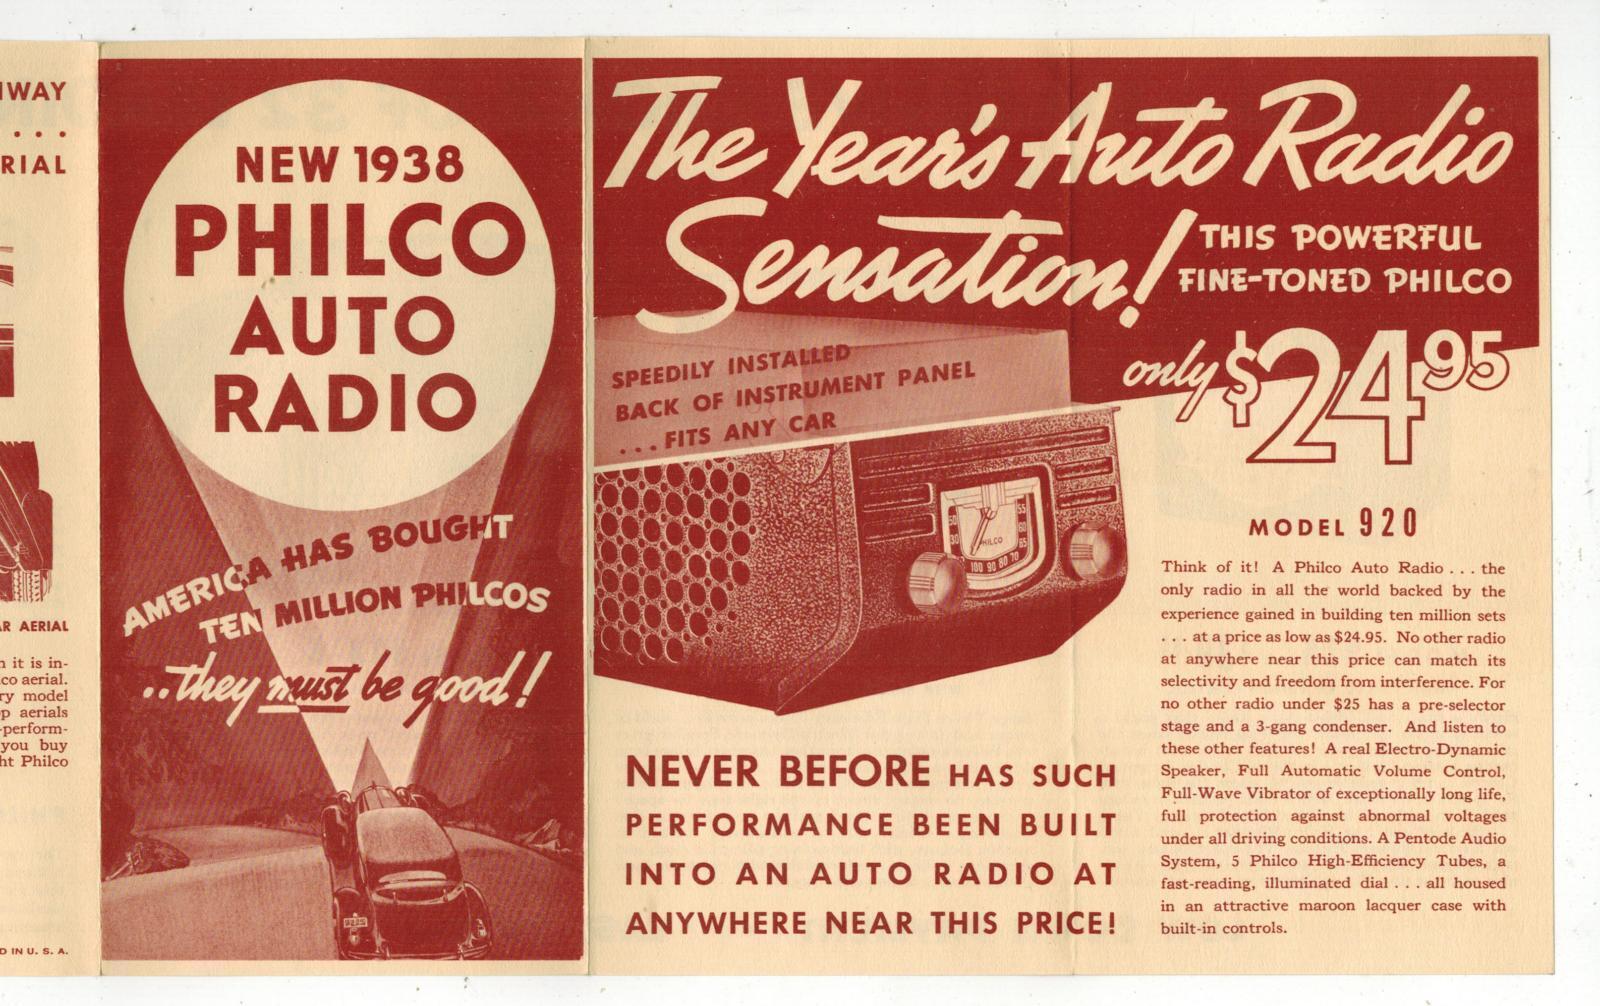 NEW 1938 PHILCO AUTO RADIO FOLDOUT ADVERTISING PAMPHLET Found Sealed in 1938 Env